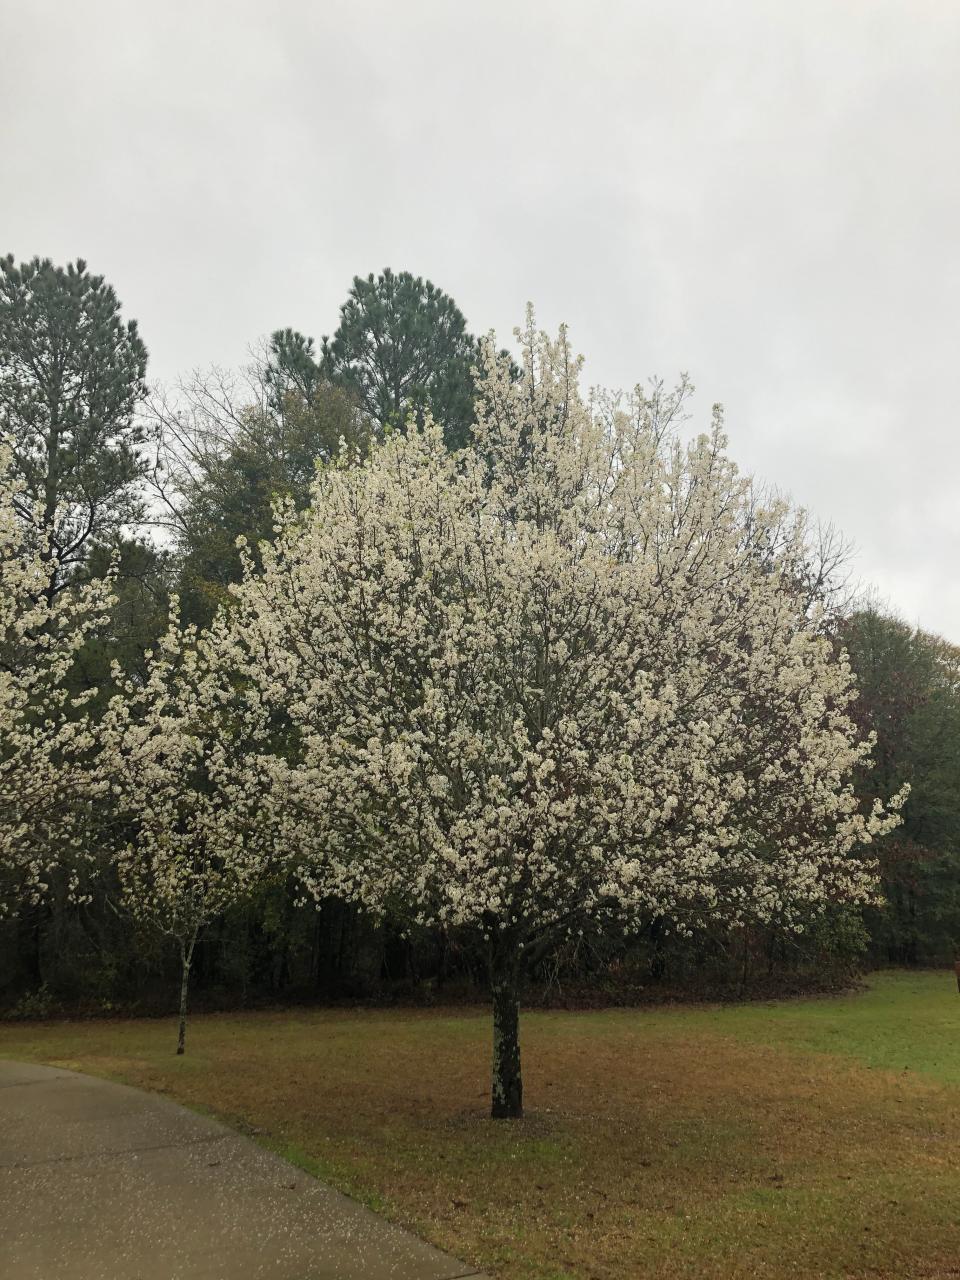 Bradford trees in bloom on March 20, 2024 in Irmo, South Carolina.